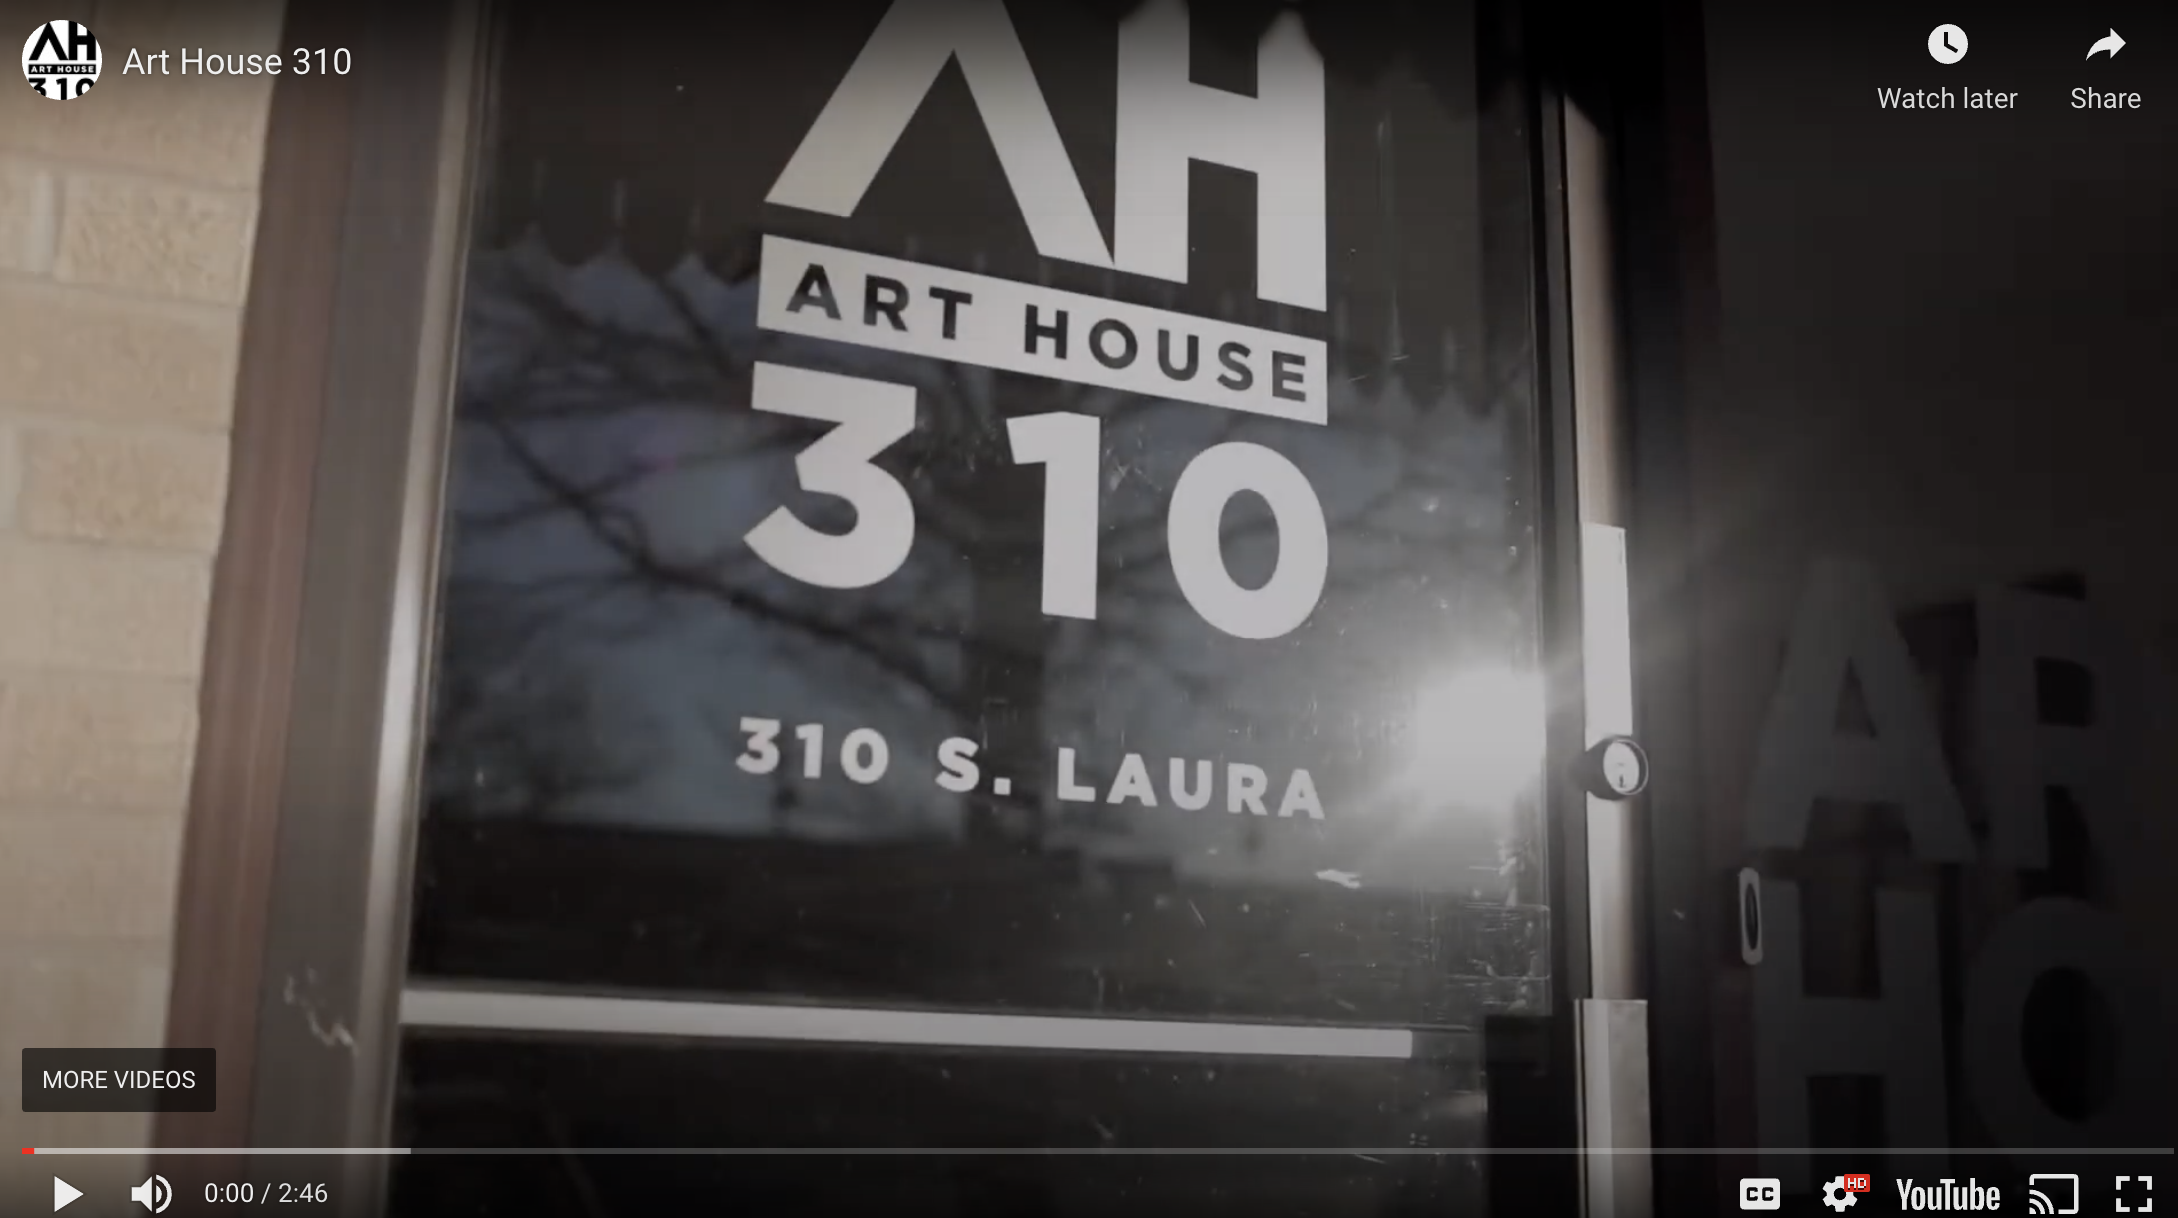 Art House 310 About Us Video